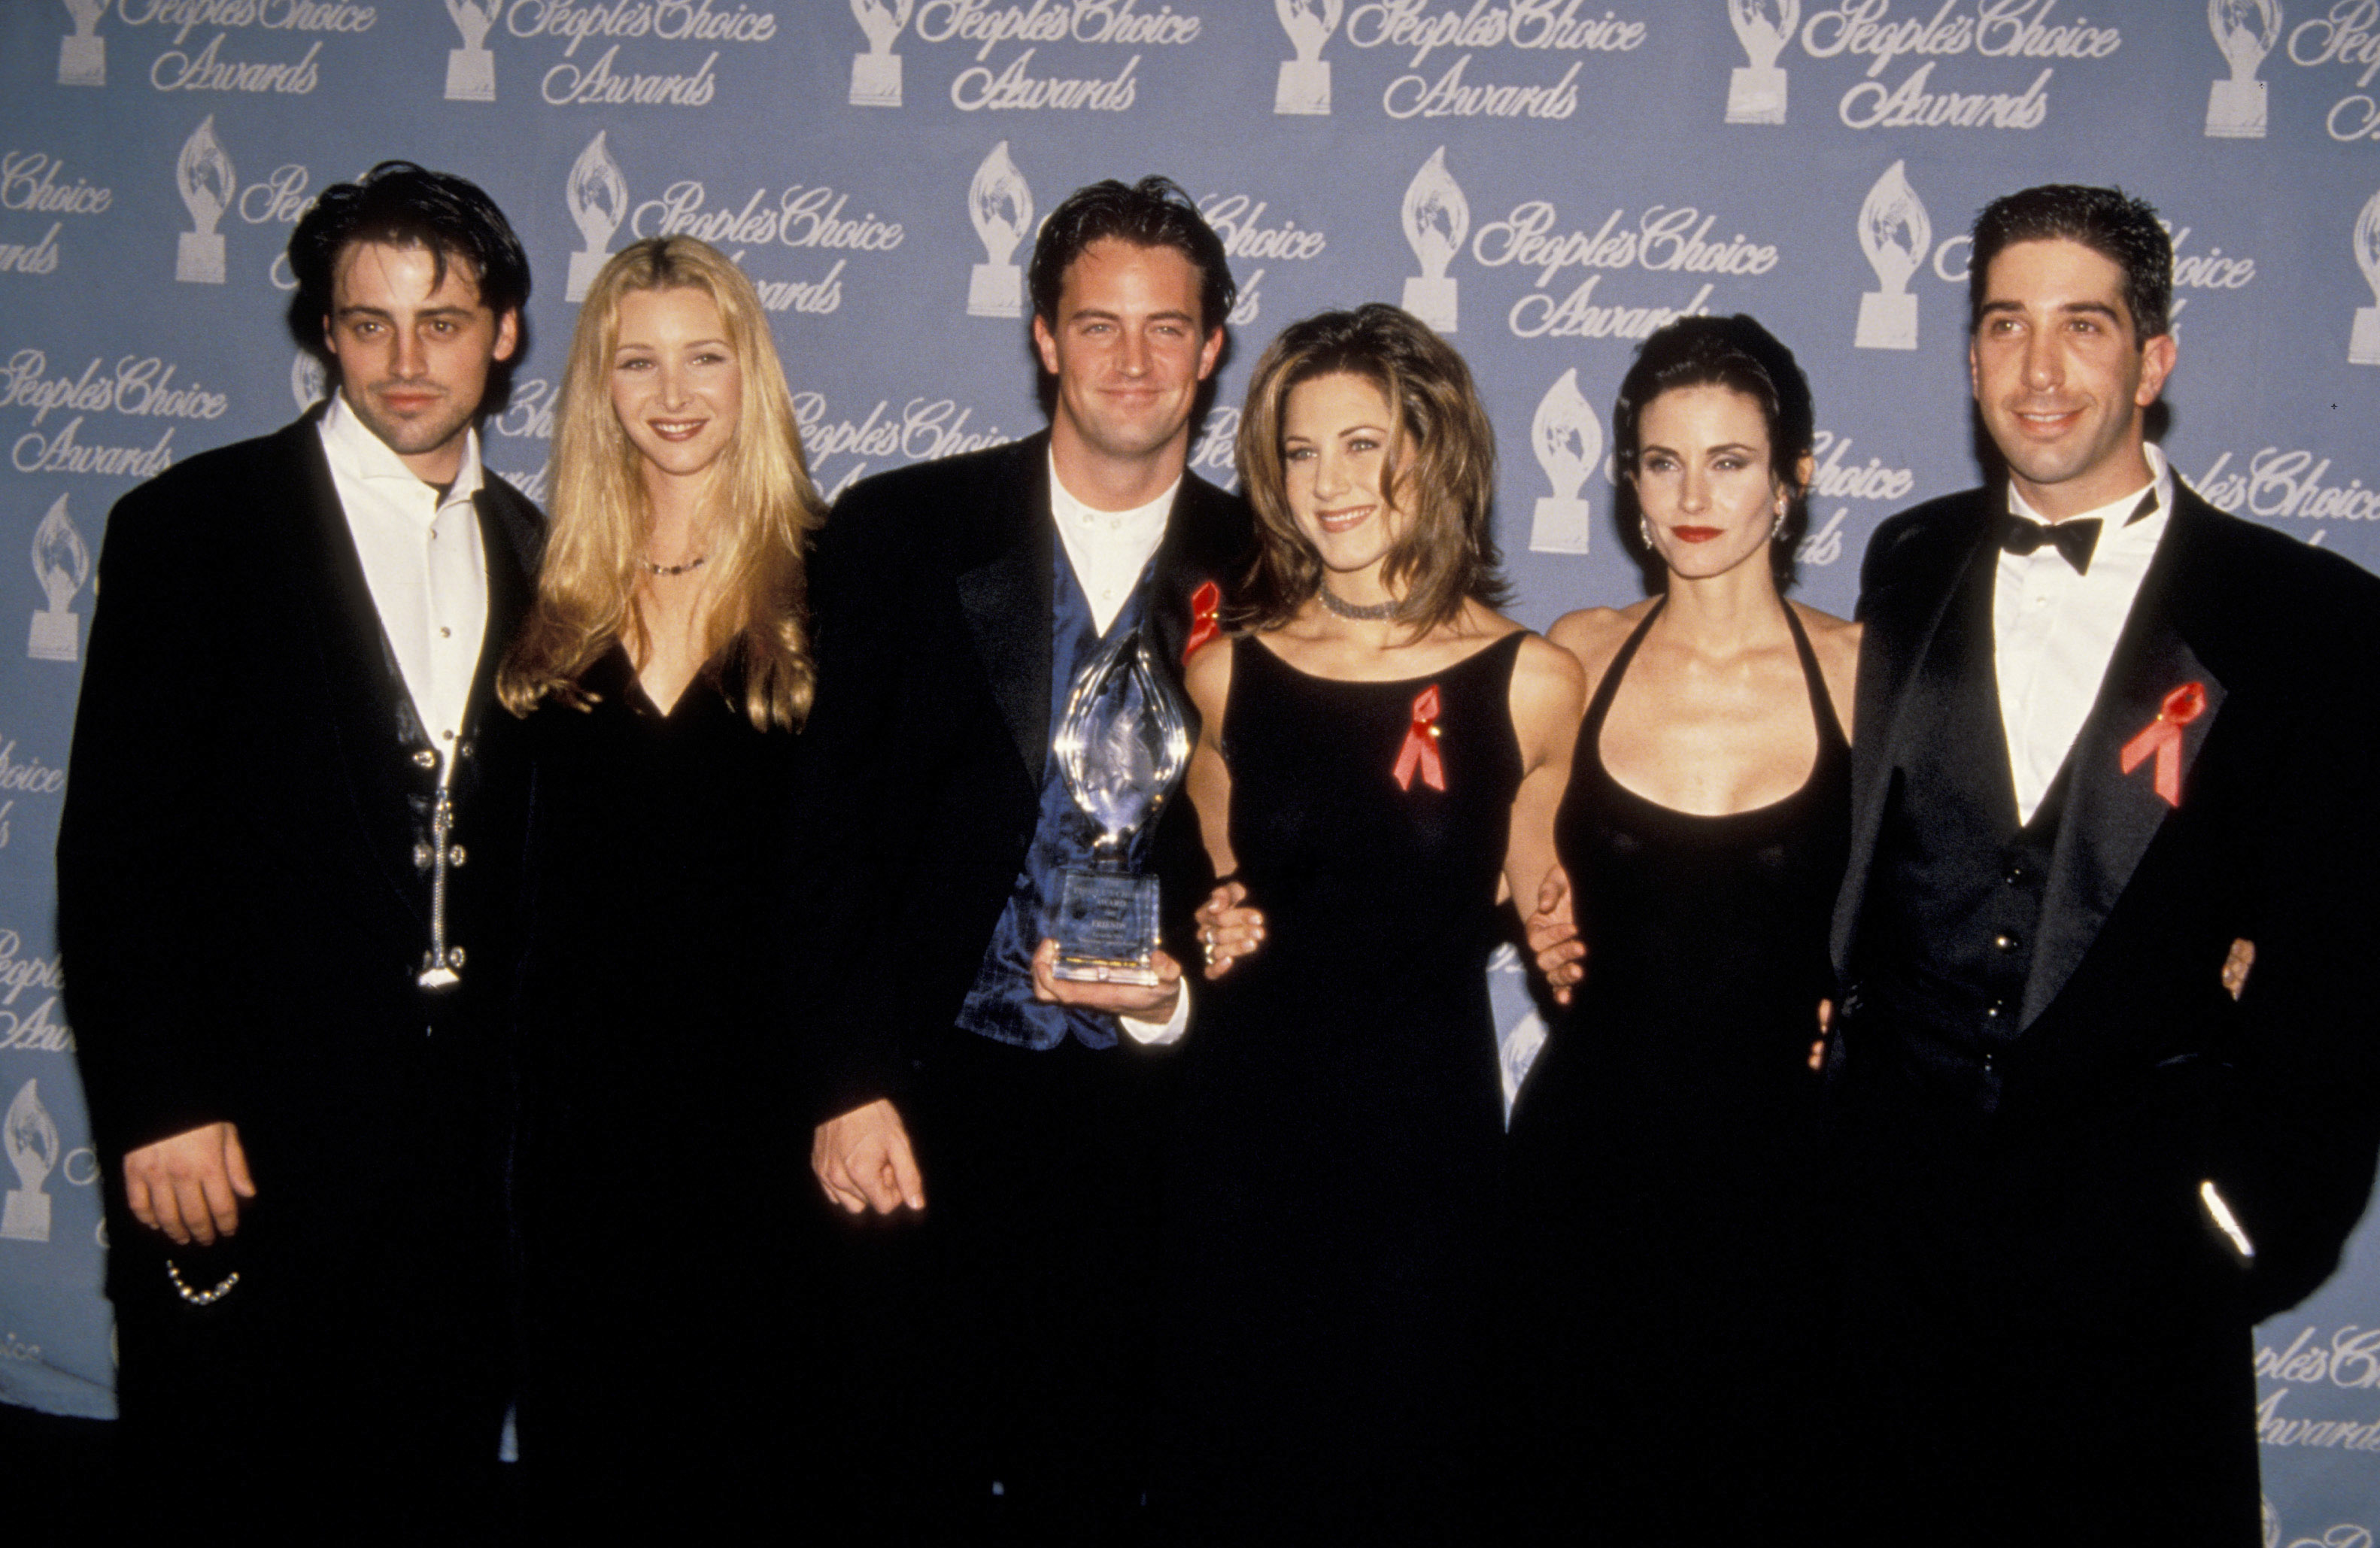 Matt LeBlanc, Lisa Kudrow, Matthew Perry, Jennifer Aniston, Courteney Cox, and David Schwimmer at the 21 Annual People's Choice Awards on March 5, 1995 | Source: Getty Images